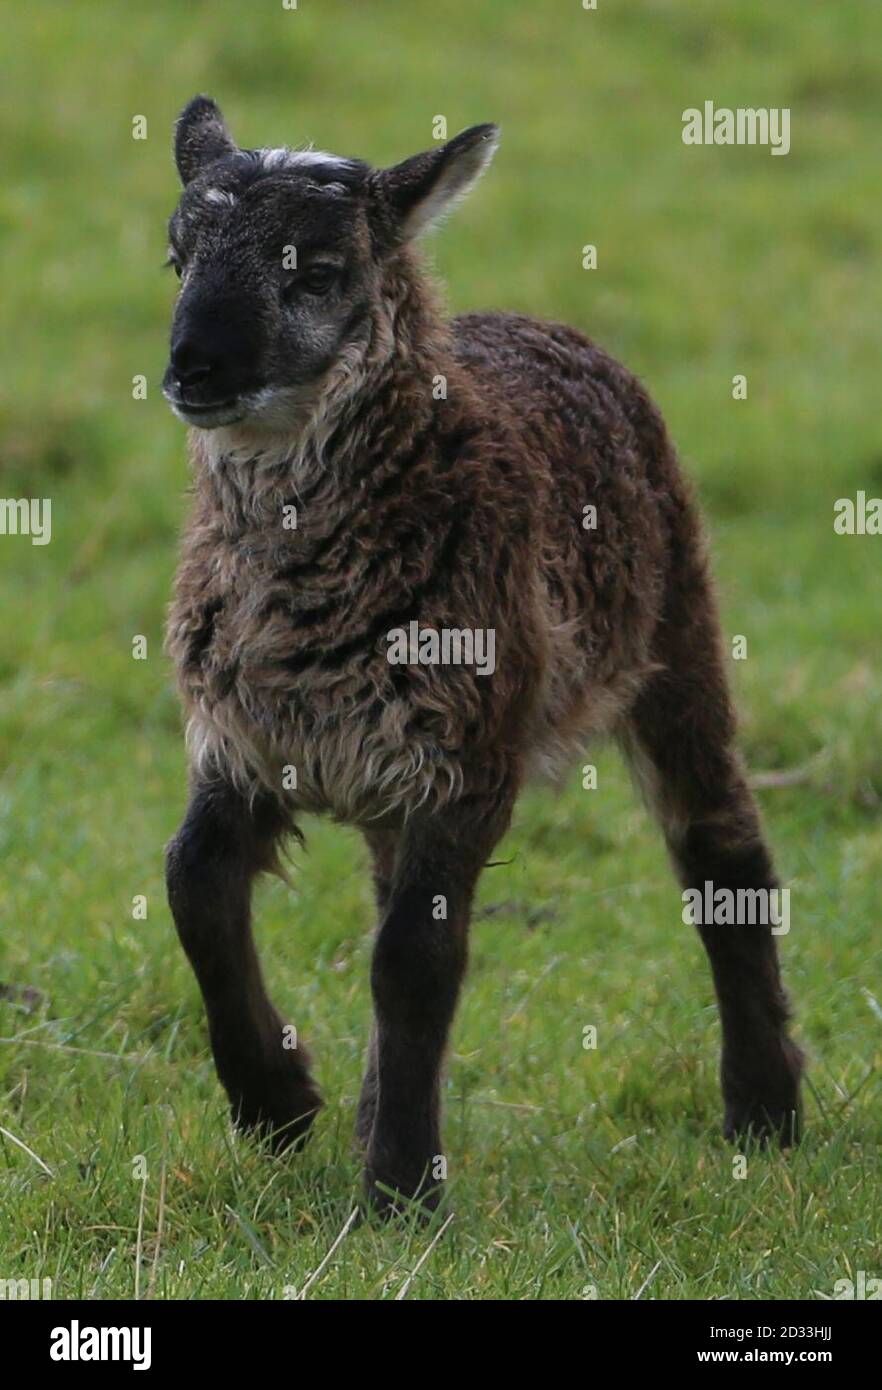 The as yet un-named Geep (a cross breed of a goat and a sheep) with its mother on Paddy Murphy's farm in Ballymore Eustace, Co Kildare. Stock Photo